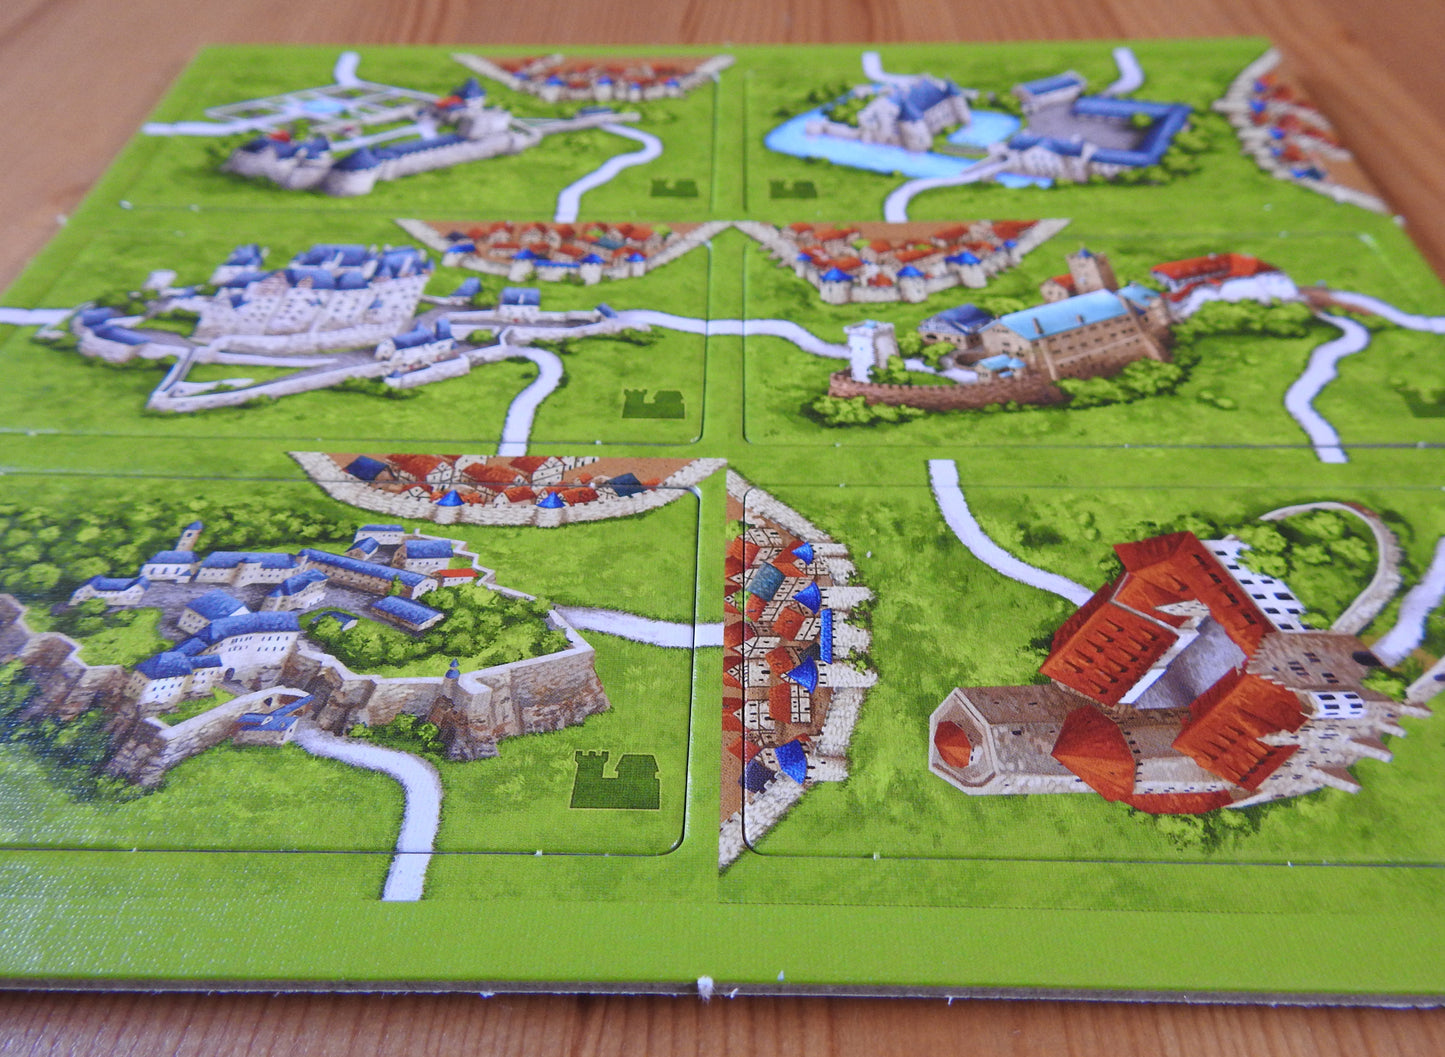 A lower view of all 6 of the double sized tiles included in this German Castles mini expansion for Carcassonne.